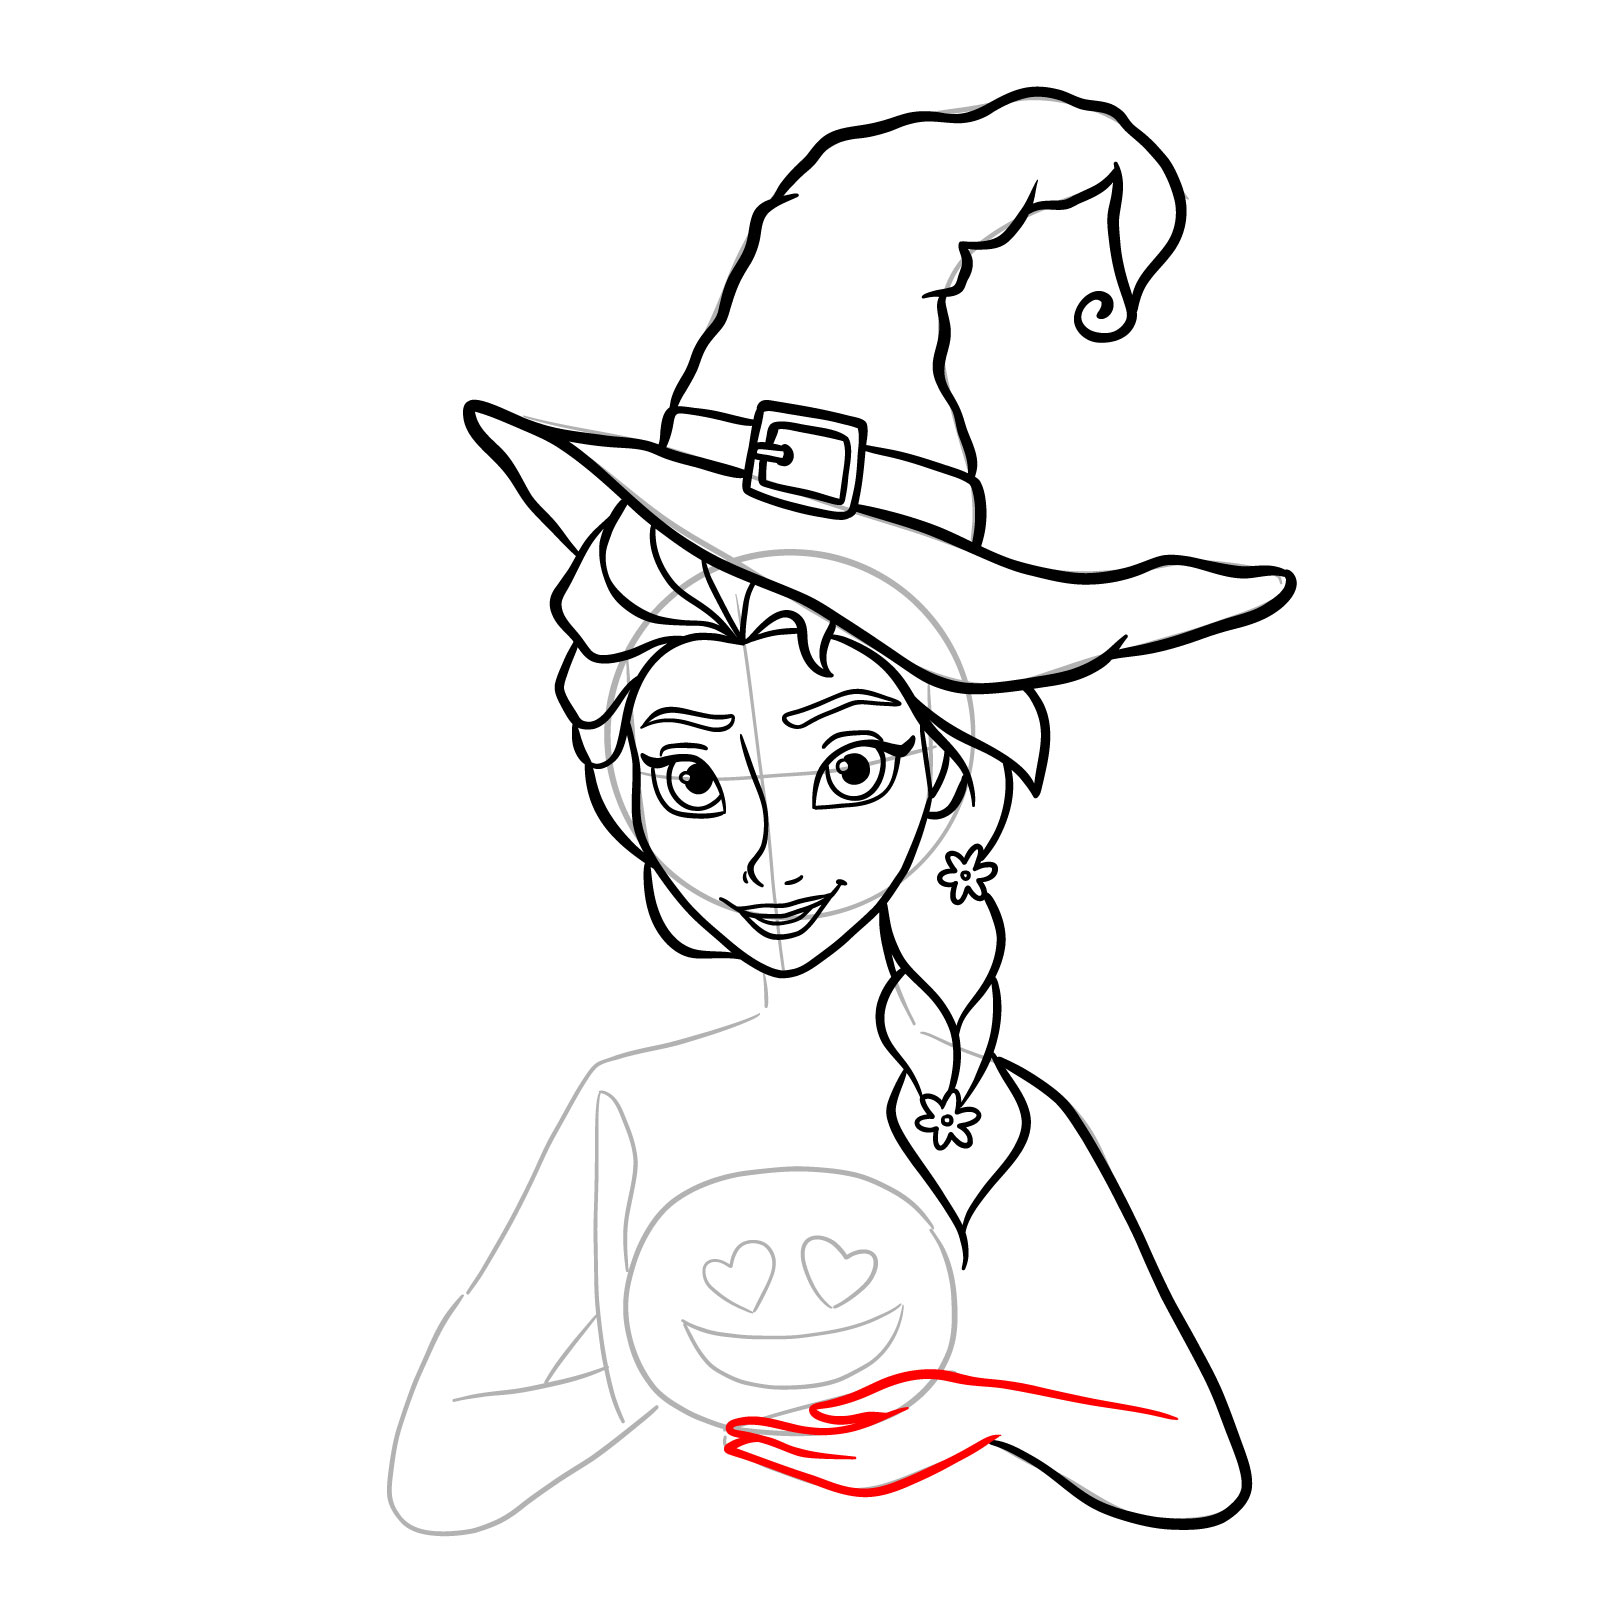 How to Draw Witch Elsa on Halloween - step 21